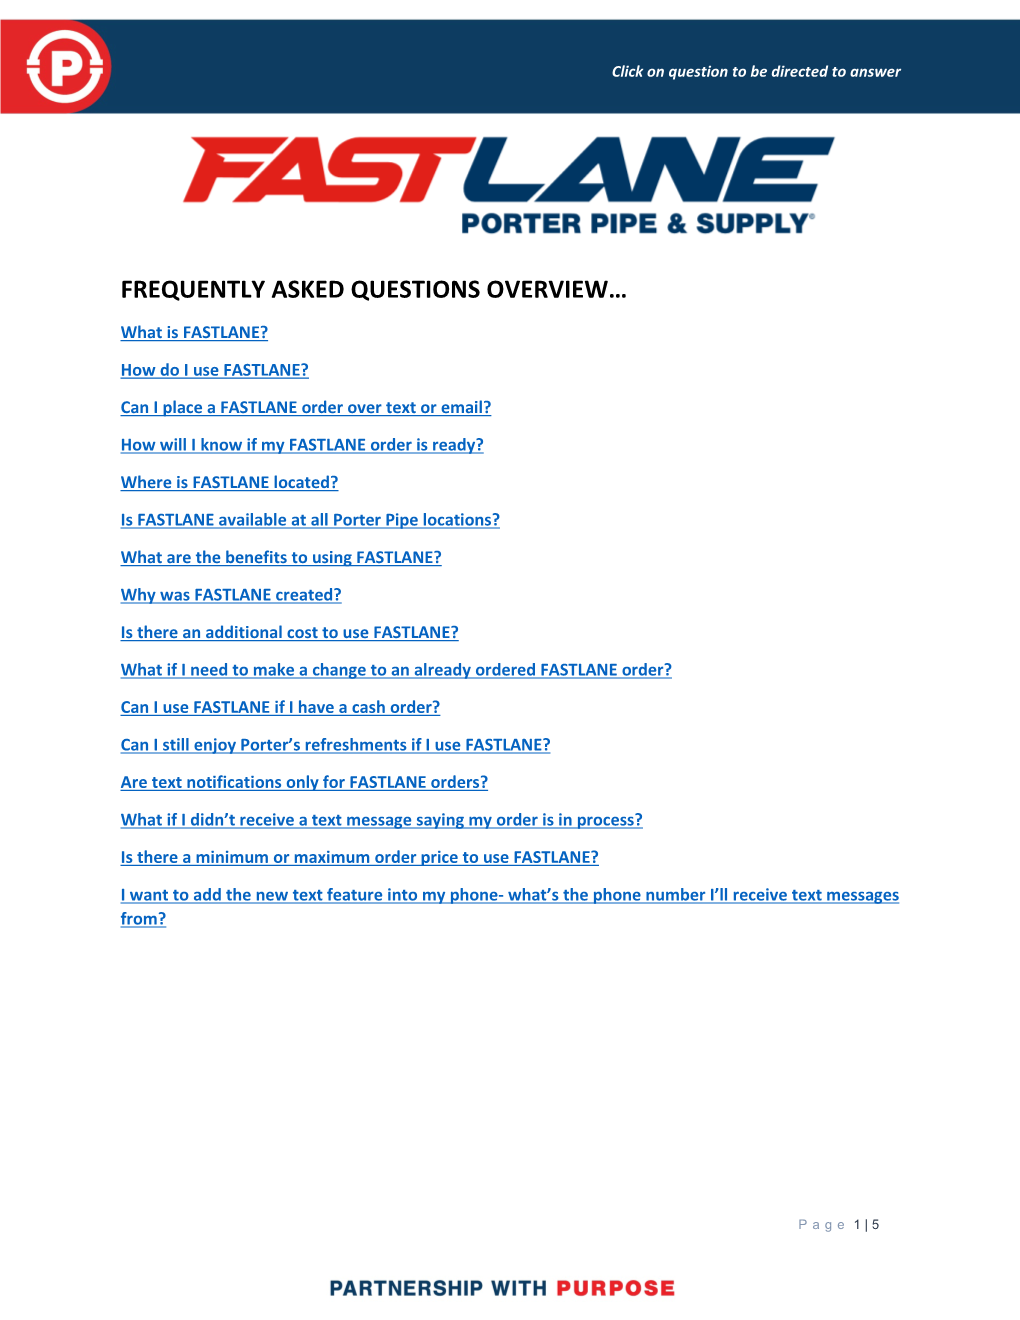 FREQUENTLY ASKED QUESTIONS OVERVIEW… What Is FASTLANE? How Do I Use FASTLANE?